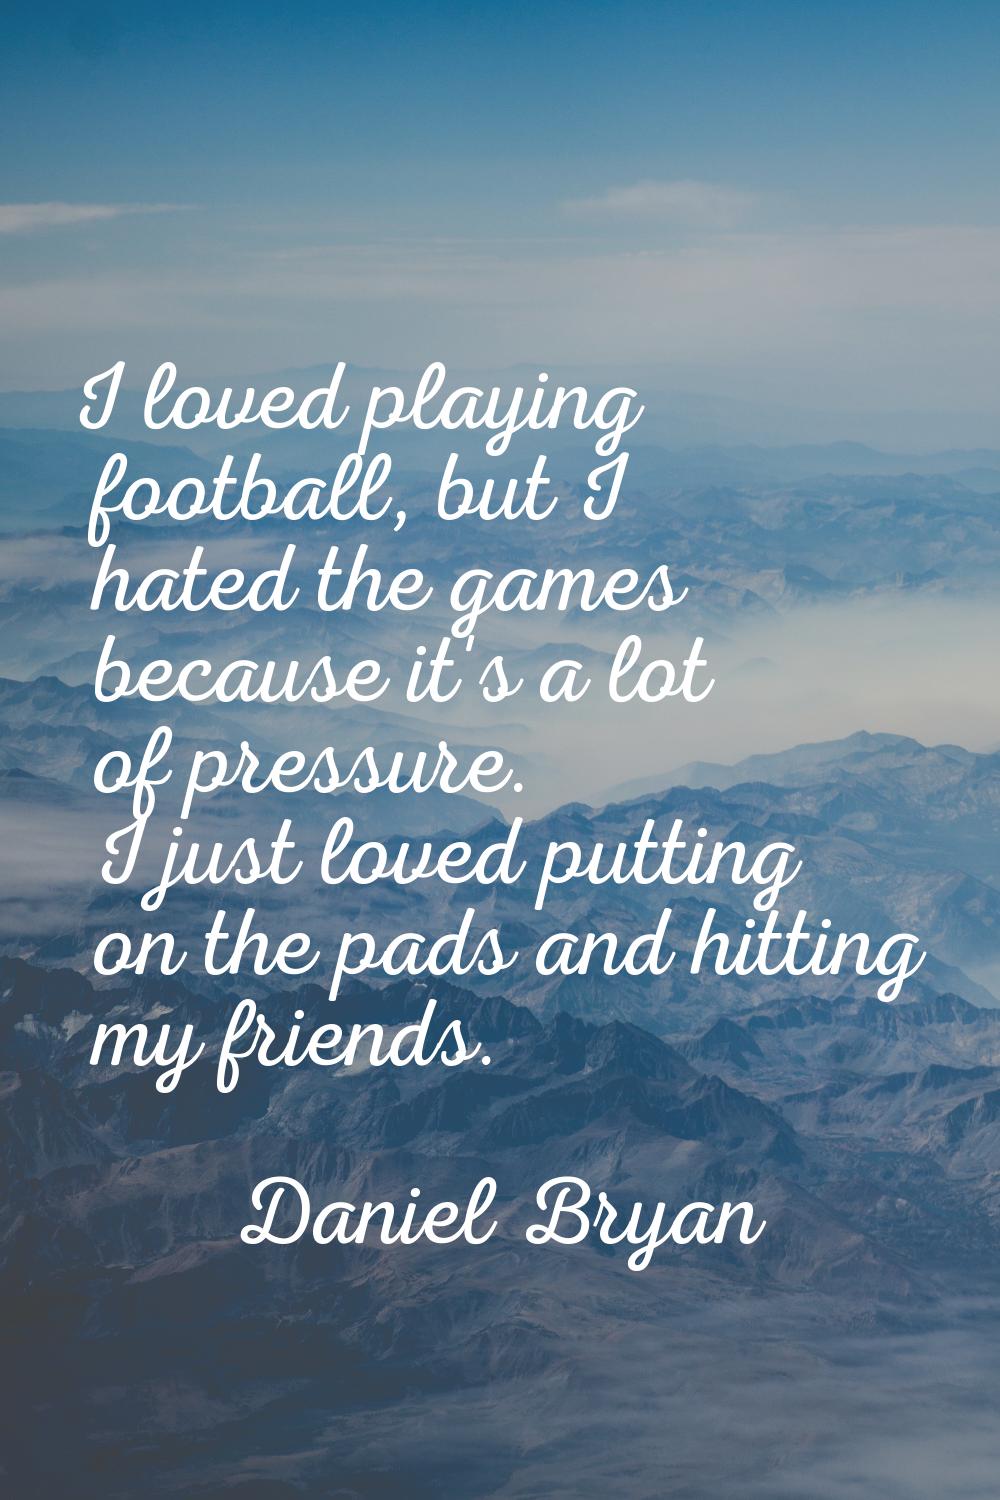 I loved playing football, but I hated the games because it's a lot of pressure. I just loved puttin